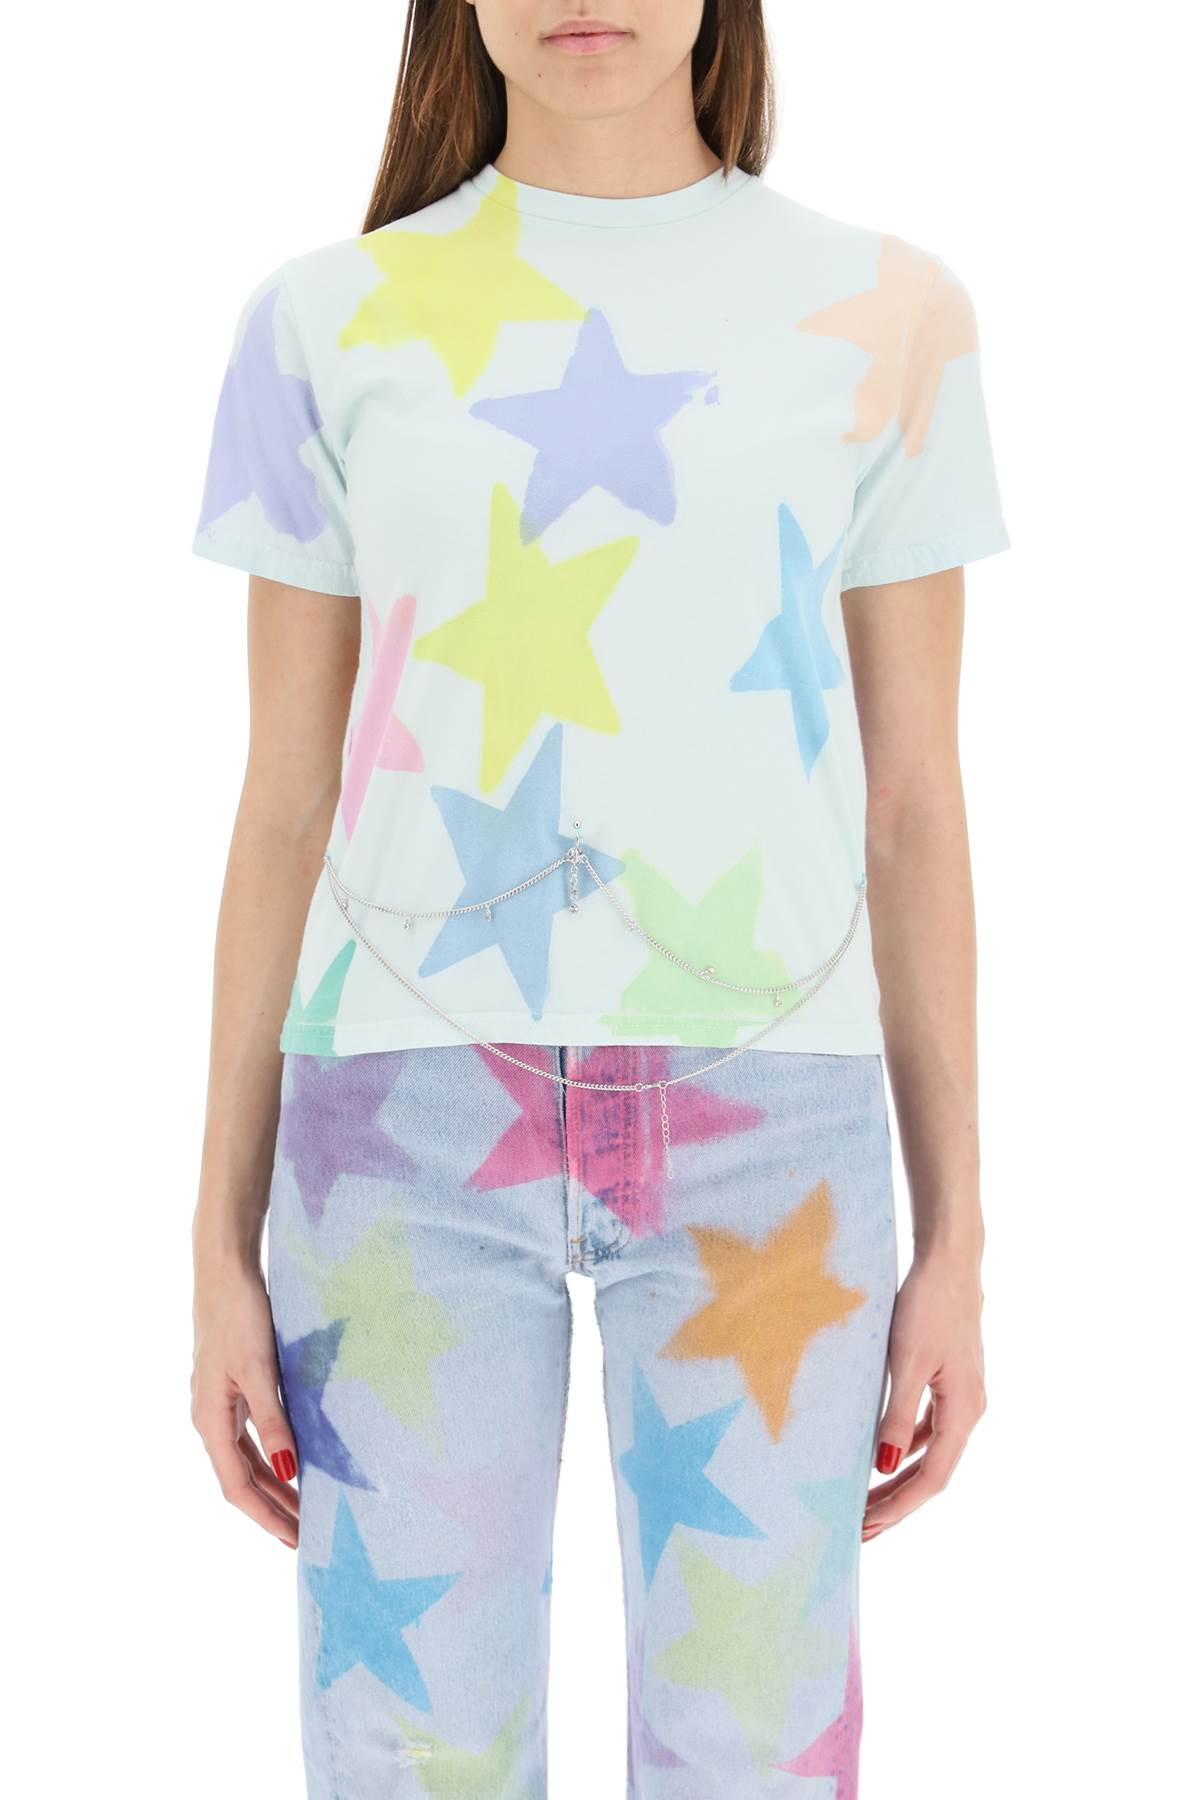 Collina Strada Star T-shirt With Bellychain